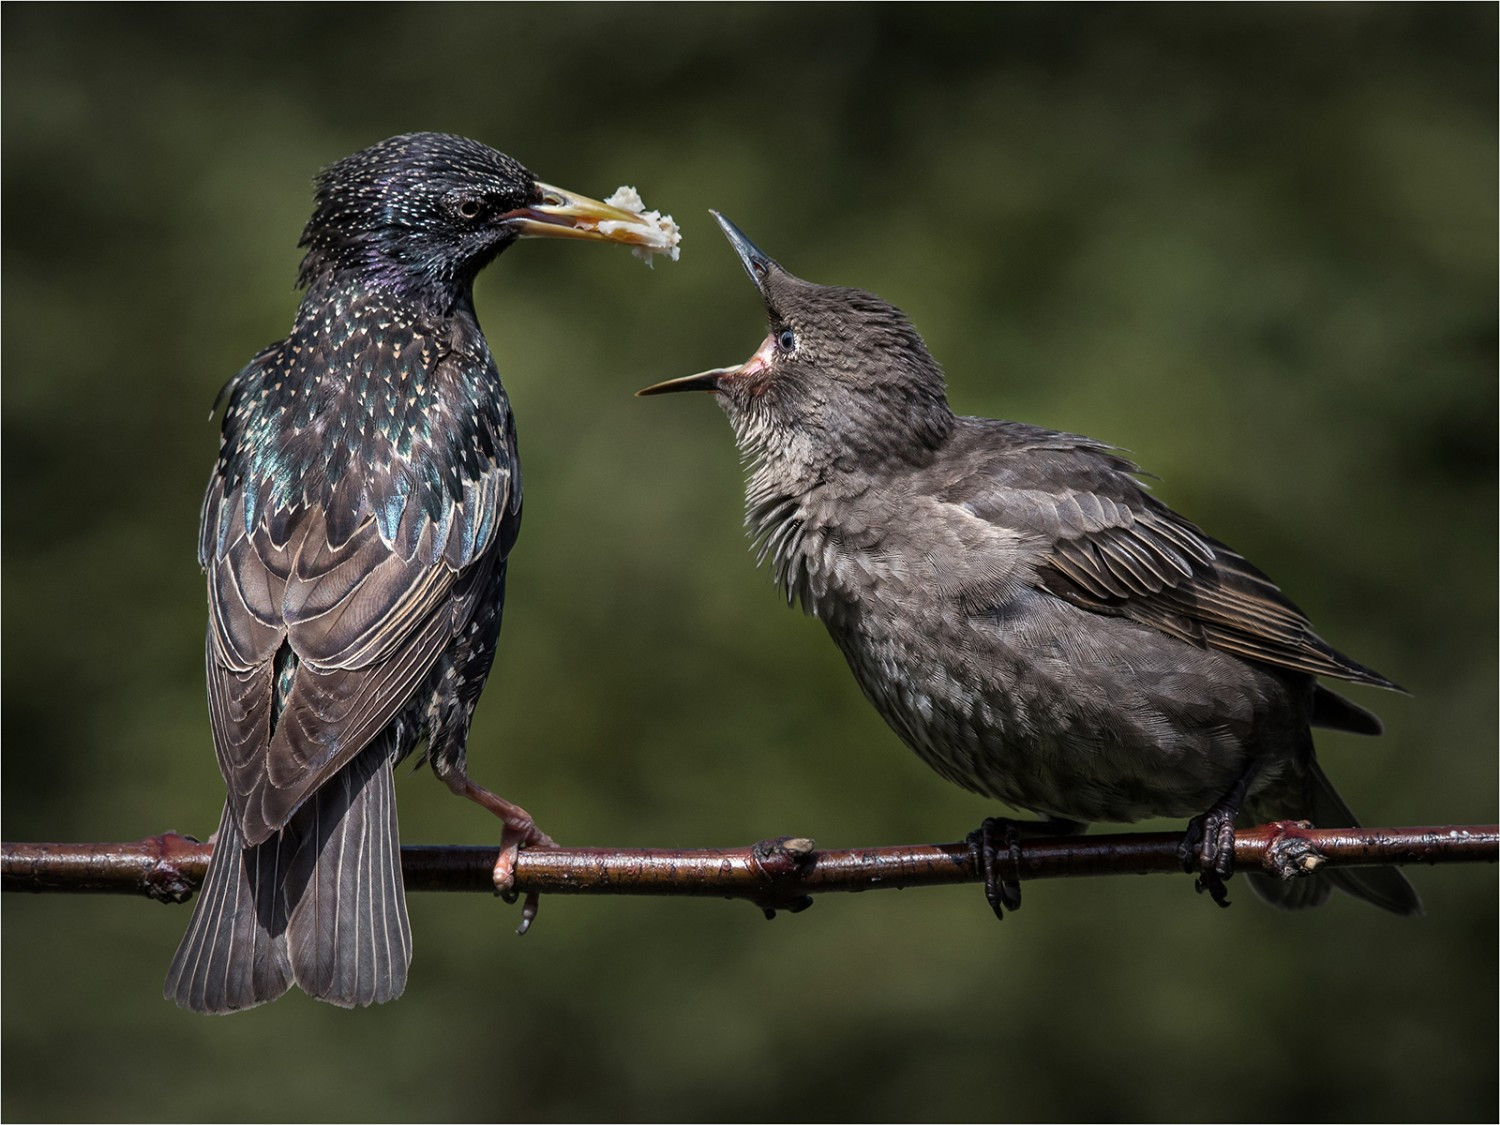 Starling feeding young 